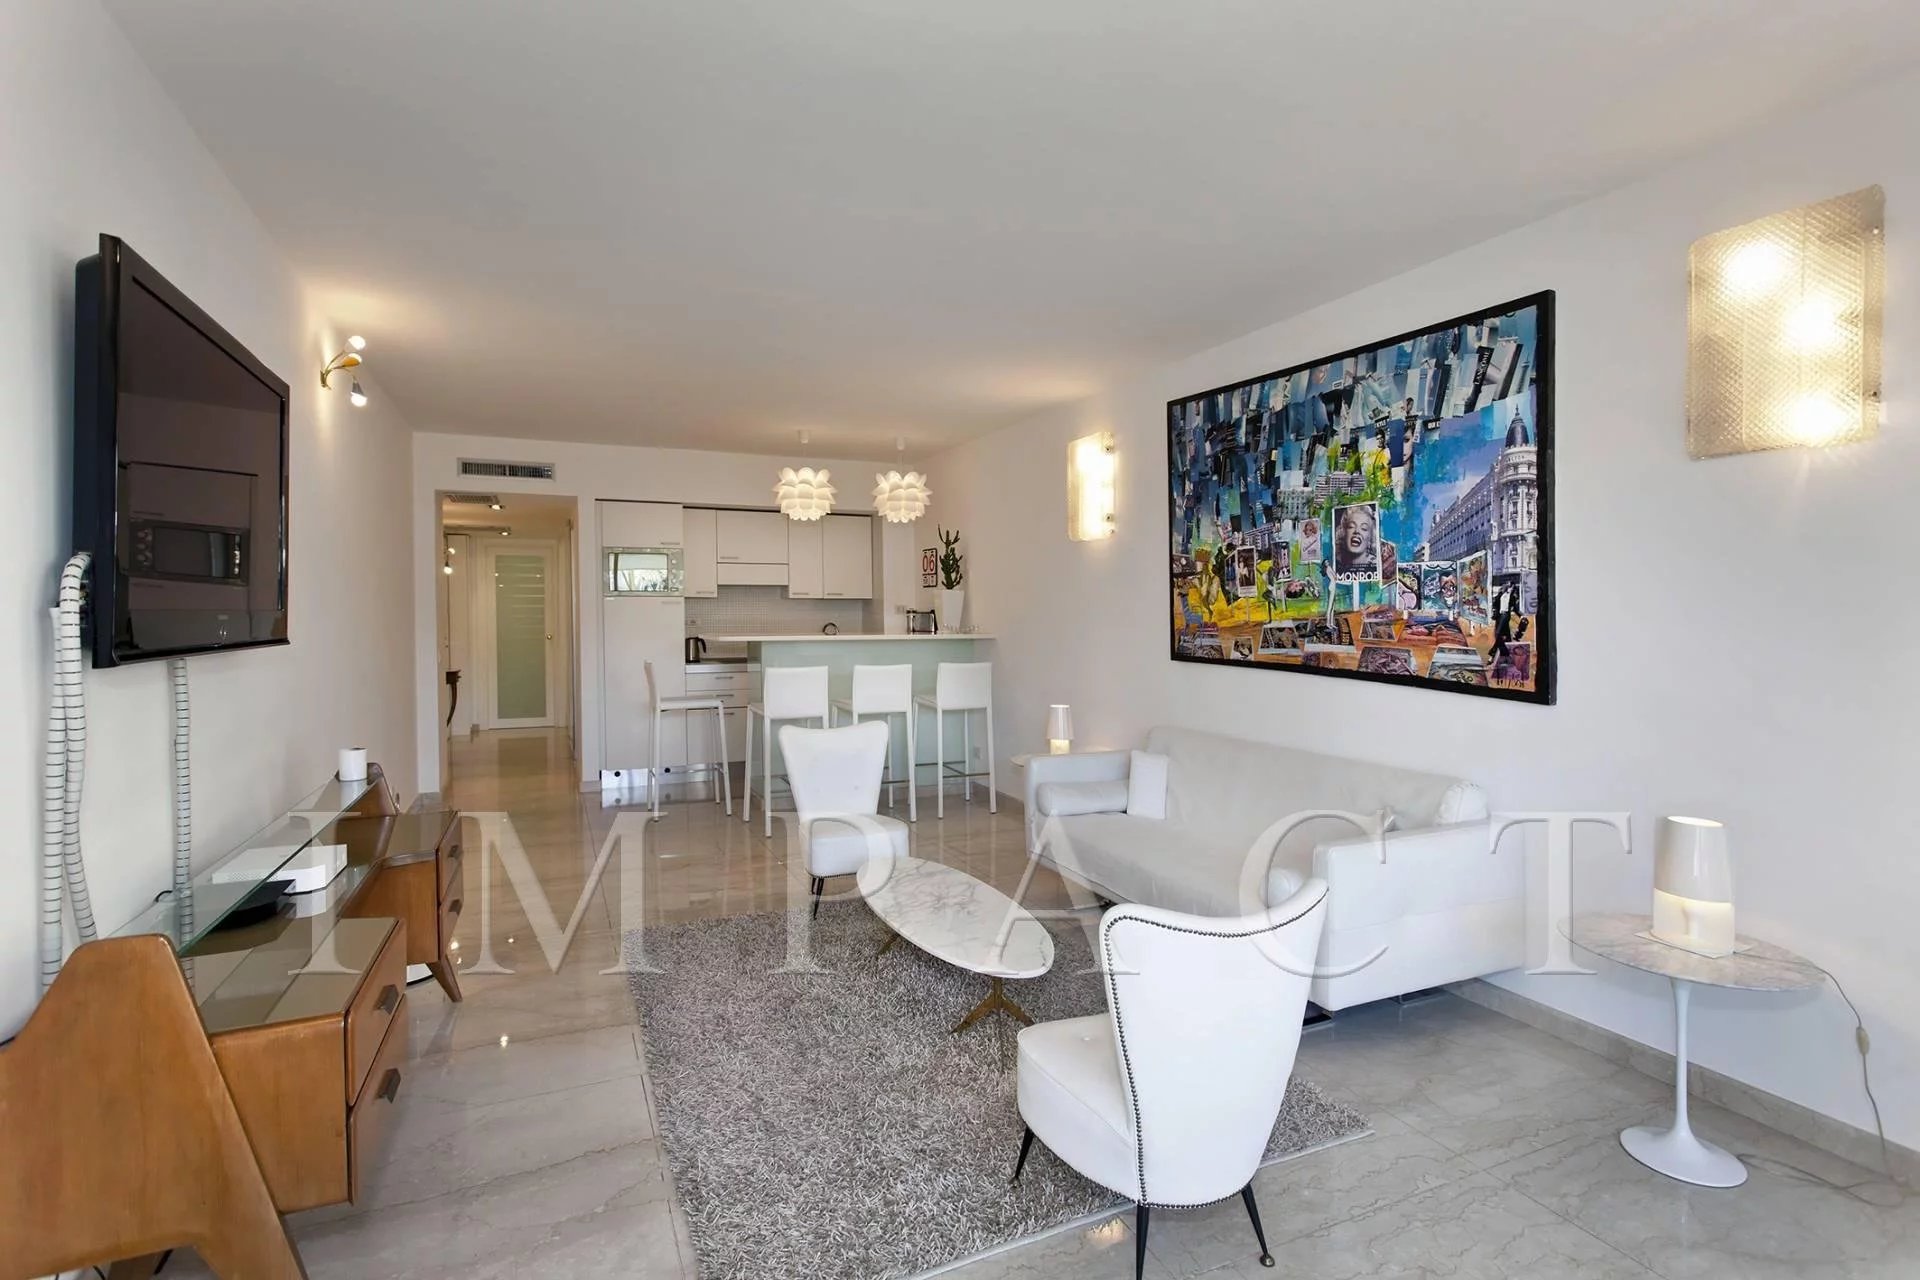 Apartment to rent Cannes center.